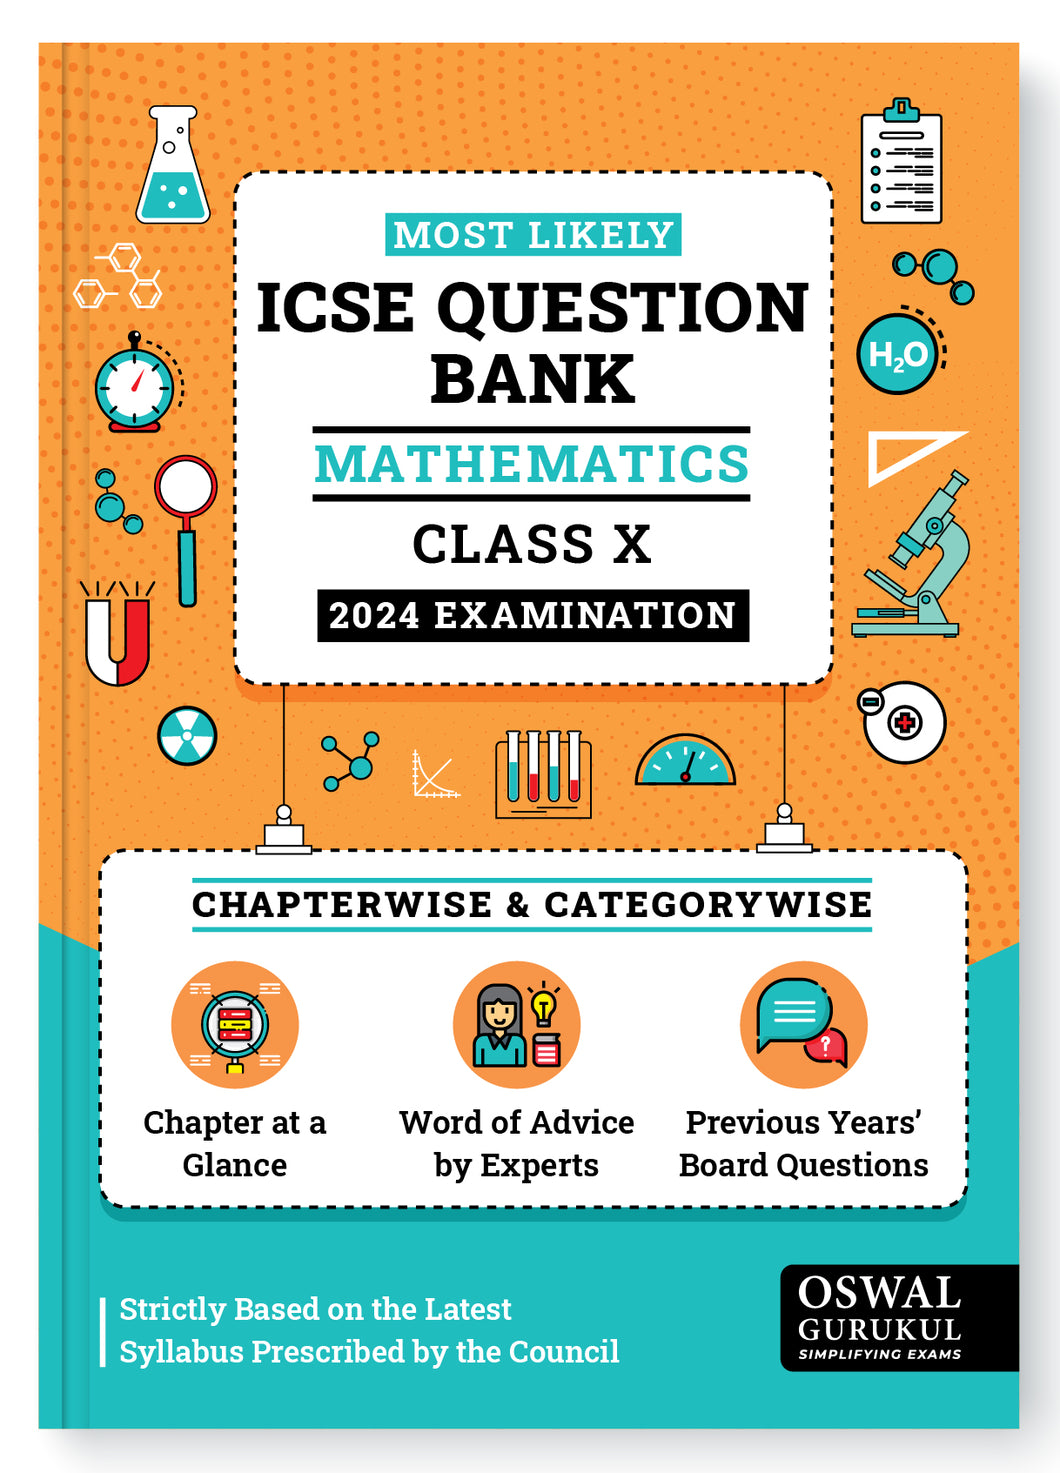 Oswal - Gurukul Mathematics Most Likely Question Bank : ICSE Class 10 For 2024 Exam